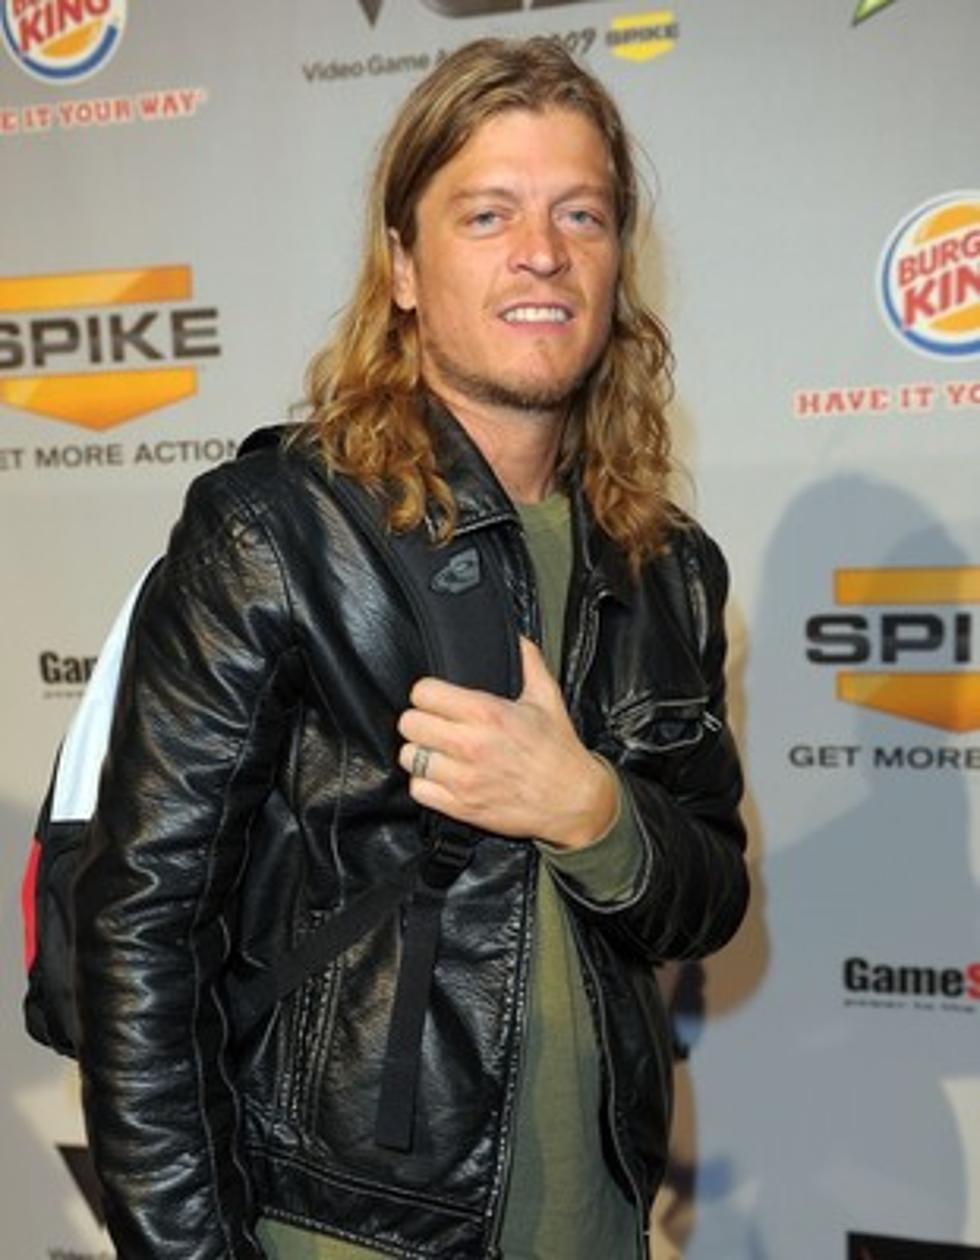 Uncle Sam to Puddle of Mudd Frontman: Pay Up!